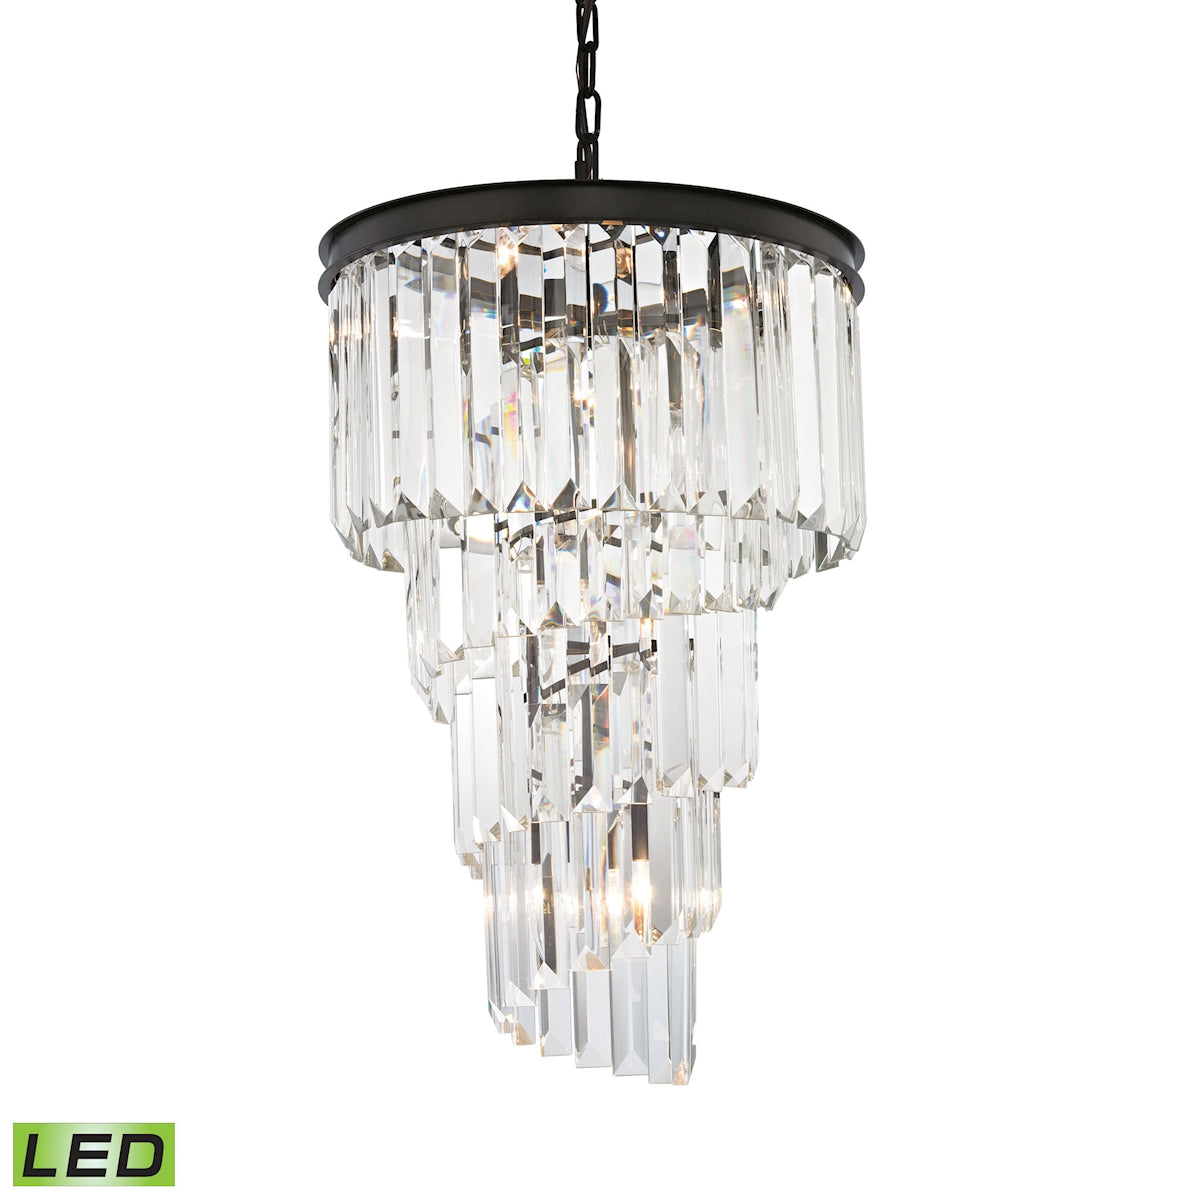 ELK Lighting 14217/6-LED - Palacial 16" Wide 6-Light Chandelier in Oil Rubbed Bronze with Clear Crys